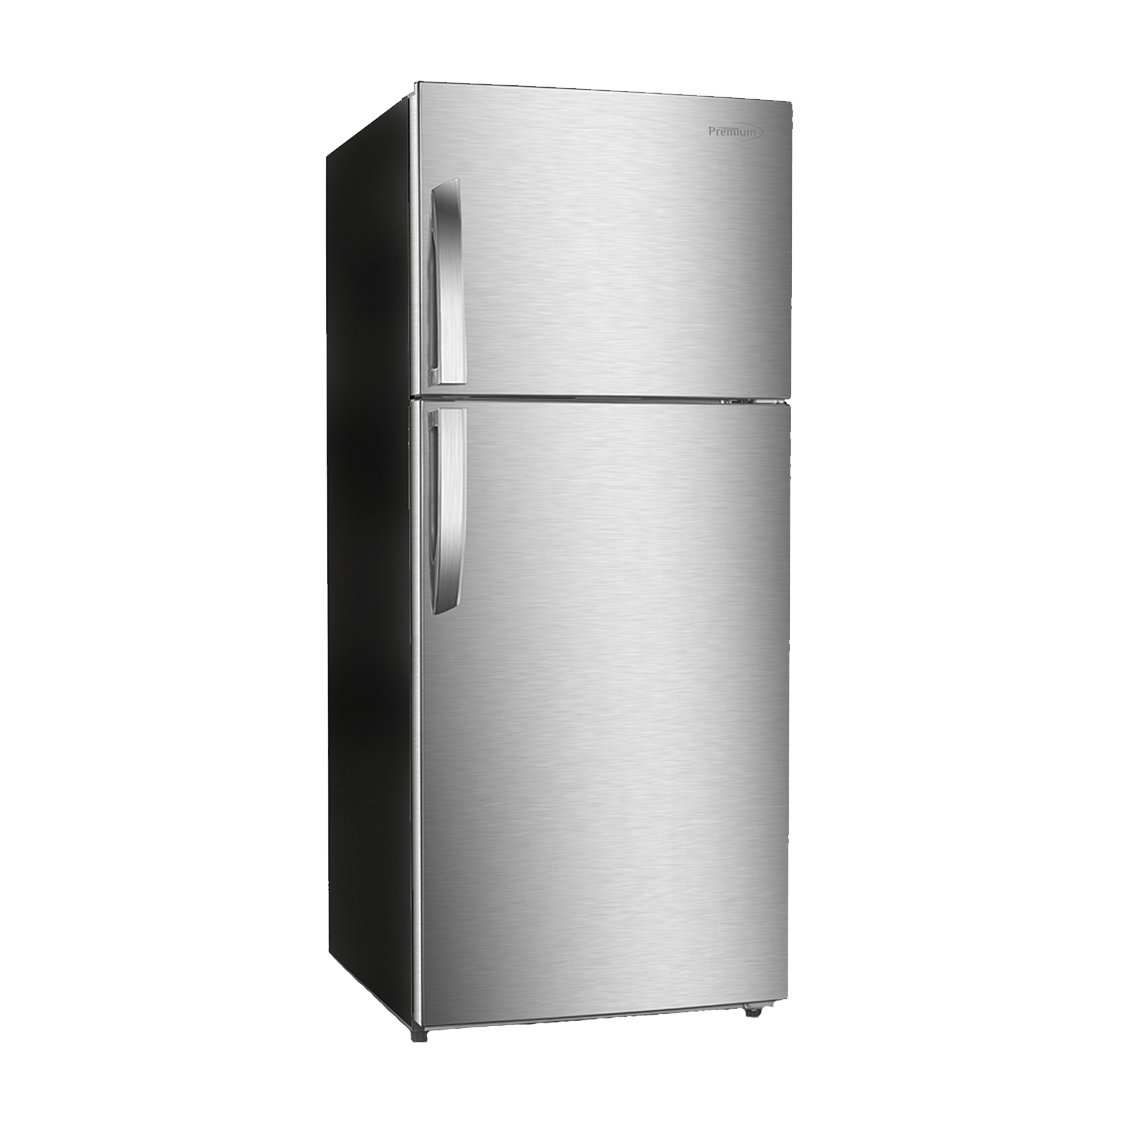 Premium 12.0 Cu Ft Frost Free Top Freezer Refrigerator in Stainless Steel